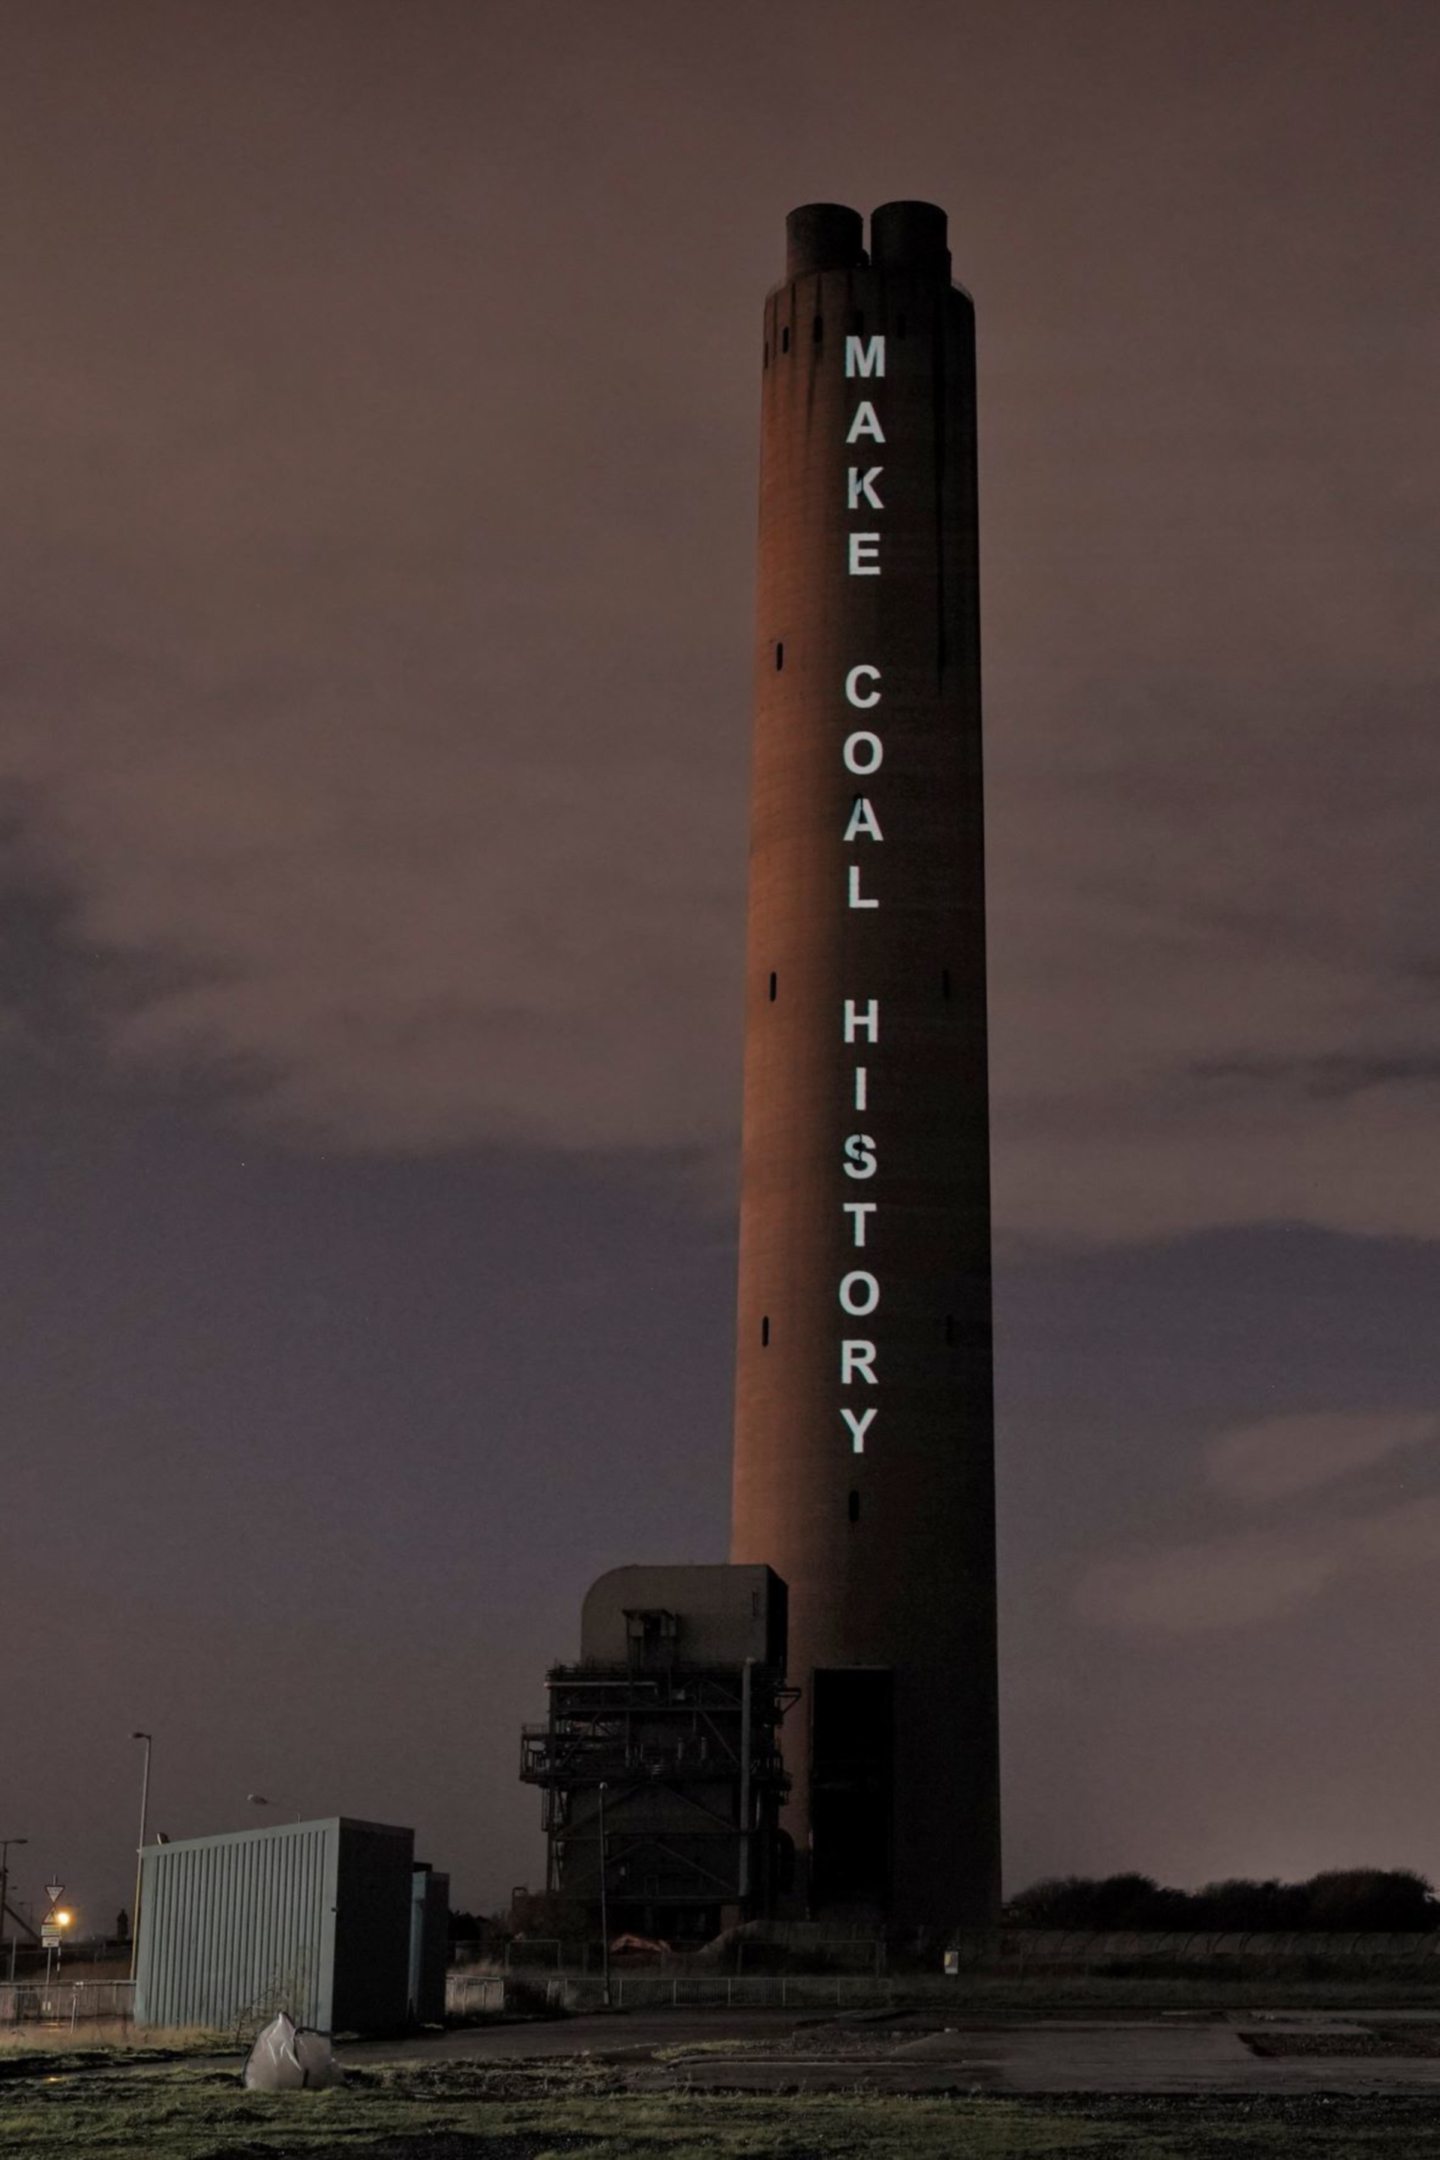 The chimney at Longannet, with Make Coal History projected on it.